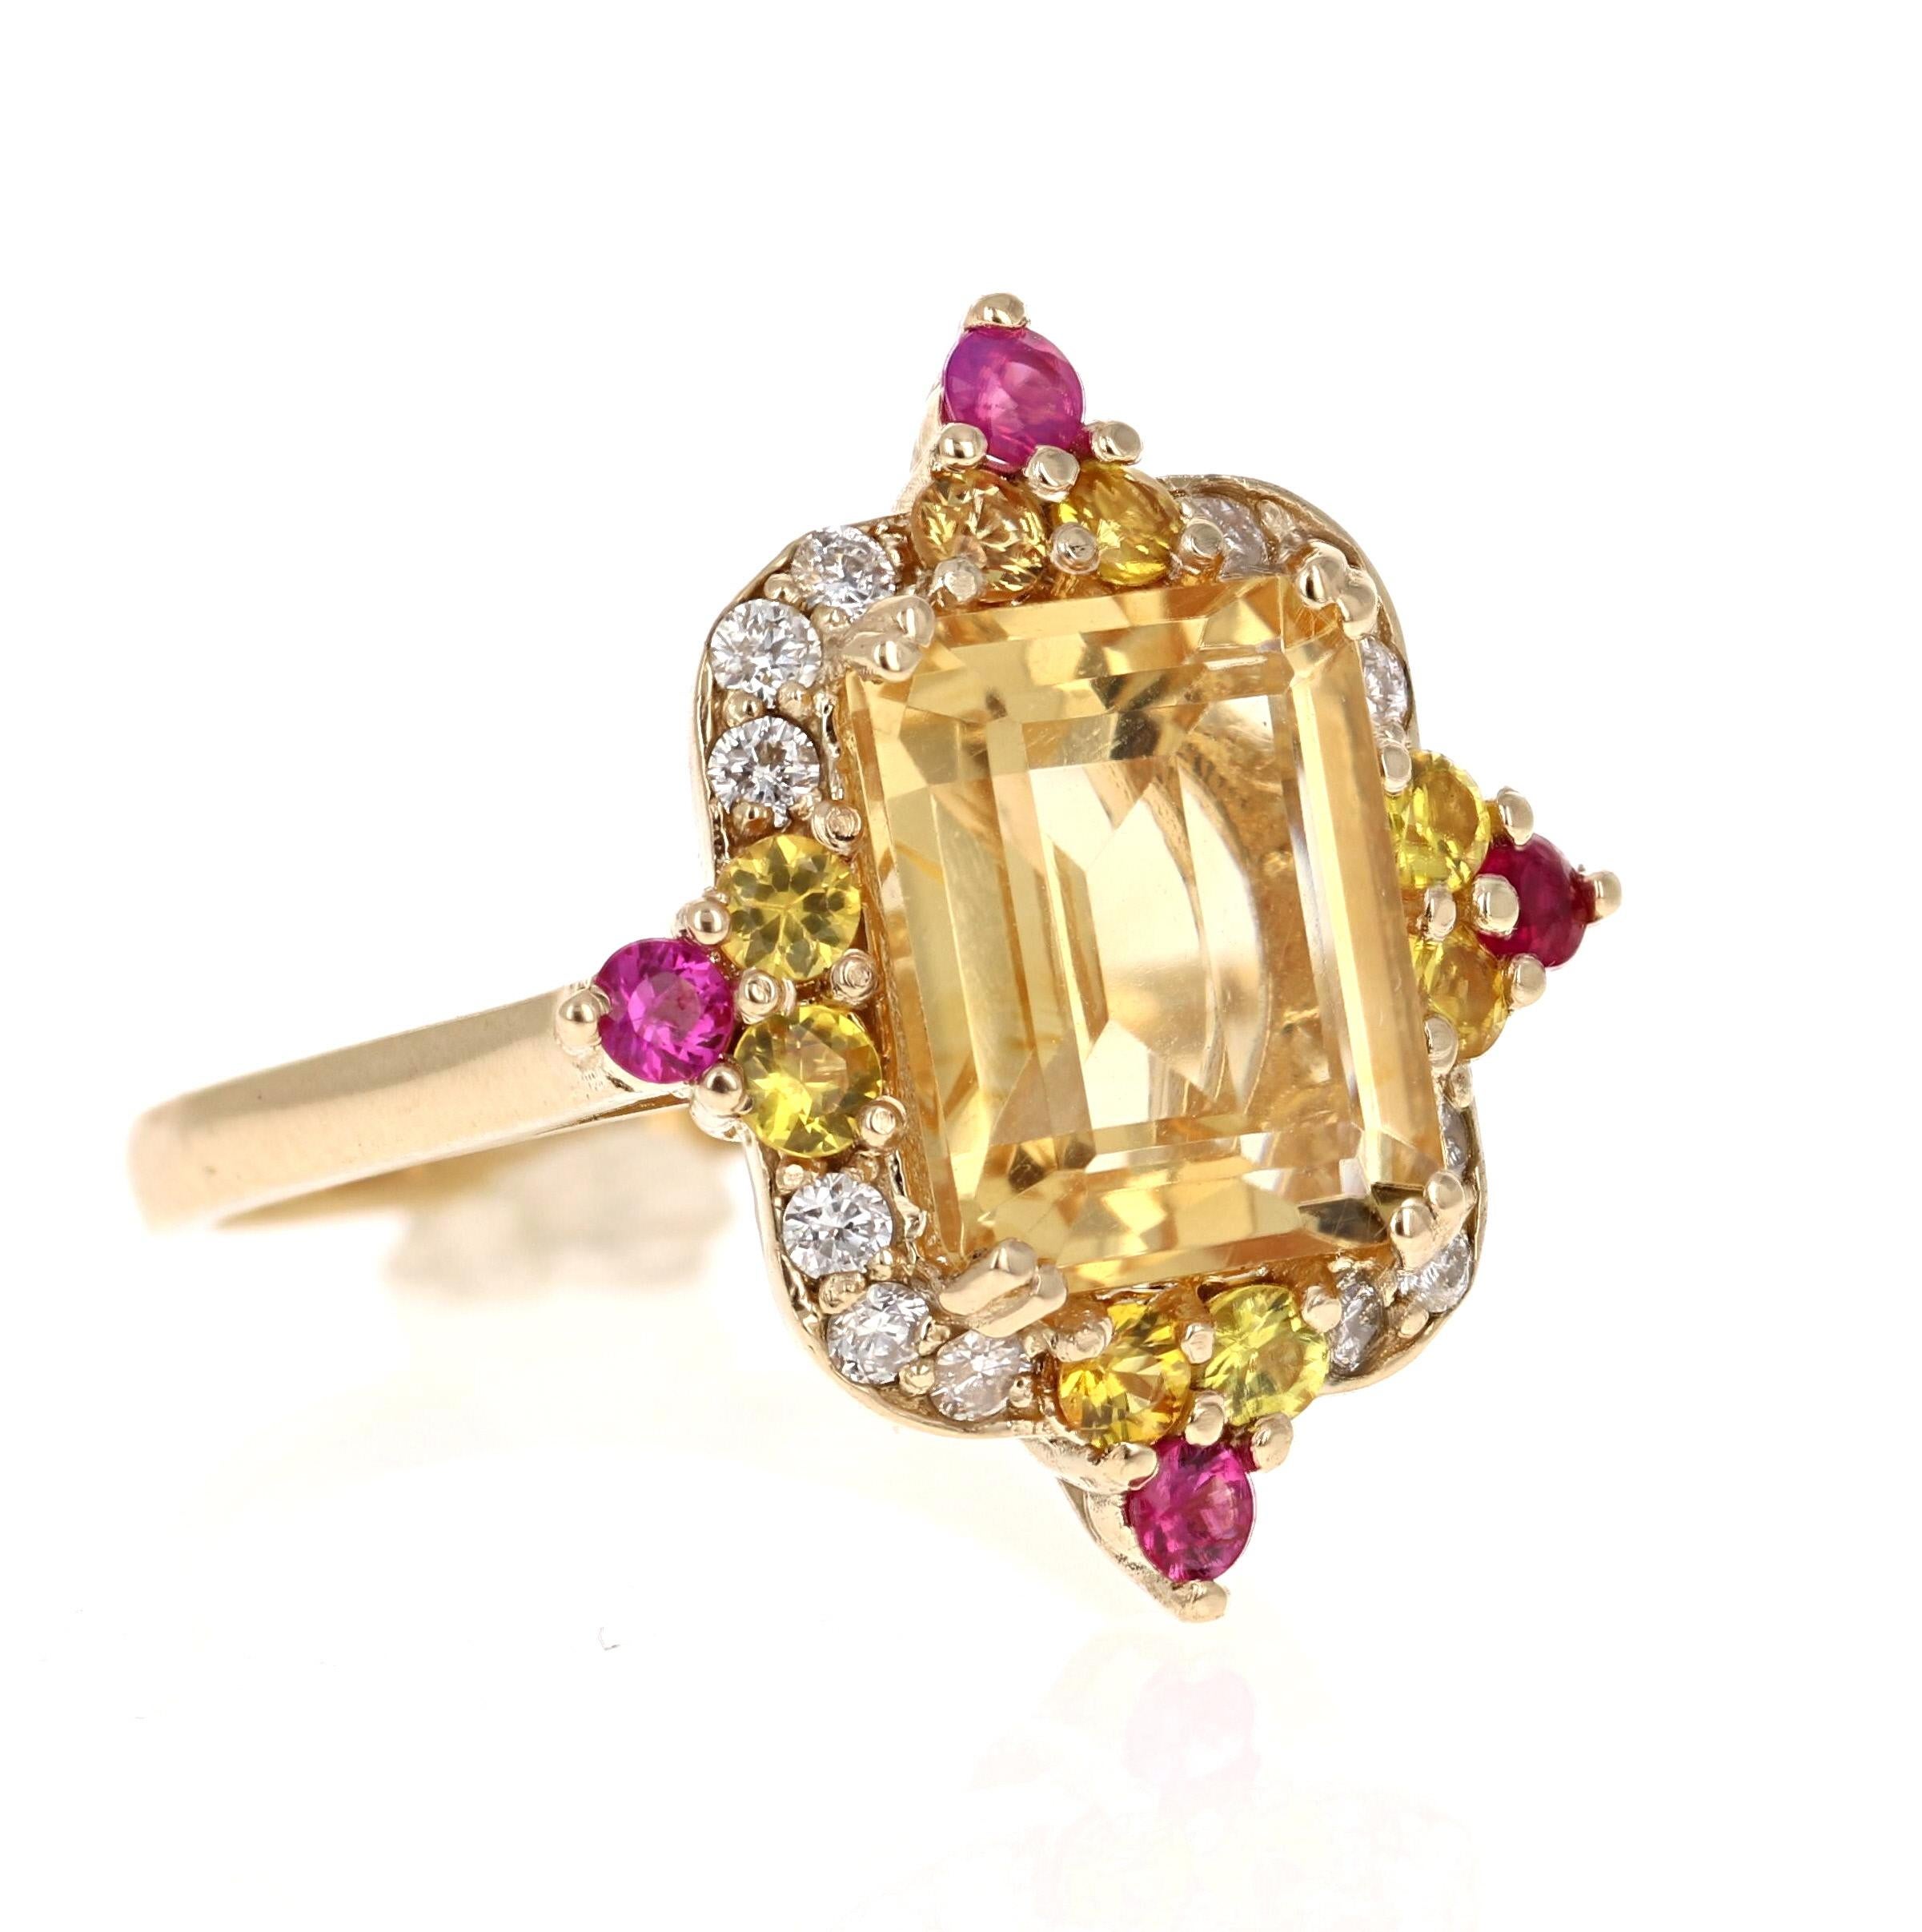 A stunning piece that can be a great alternative to a Yellow Diamond!

This gorgeous ring has a beautiful Emerald Cut Citrine Quartz weighing 4.03 Carats and is surrounded by 12 Round Cut Yellow and Pink Sapphires weighing 0.78 Carats and 12 Round